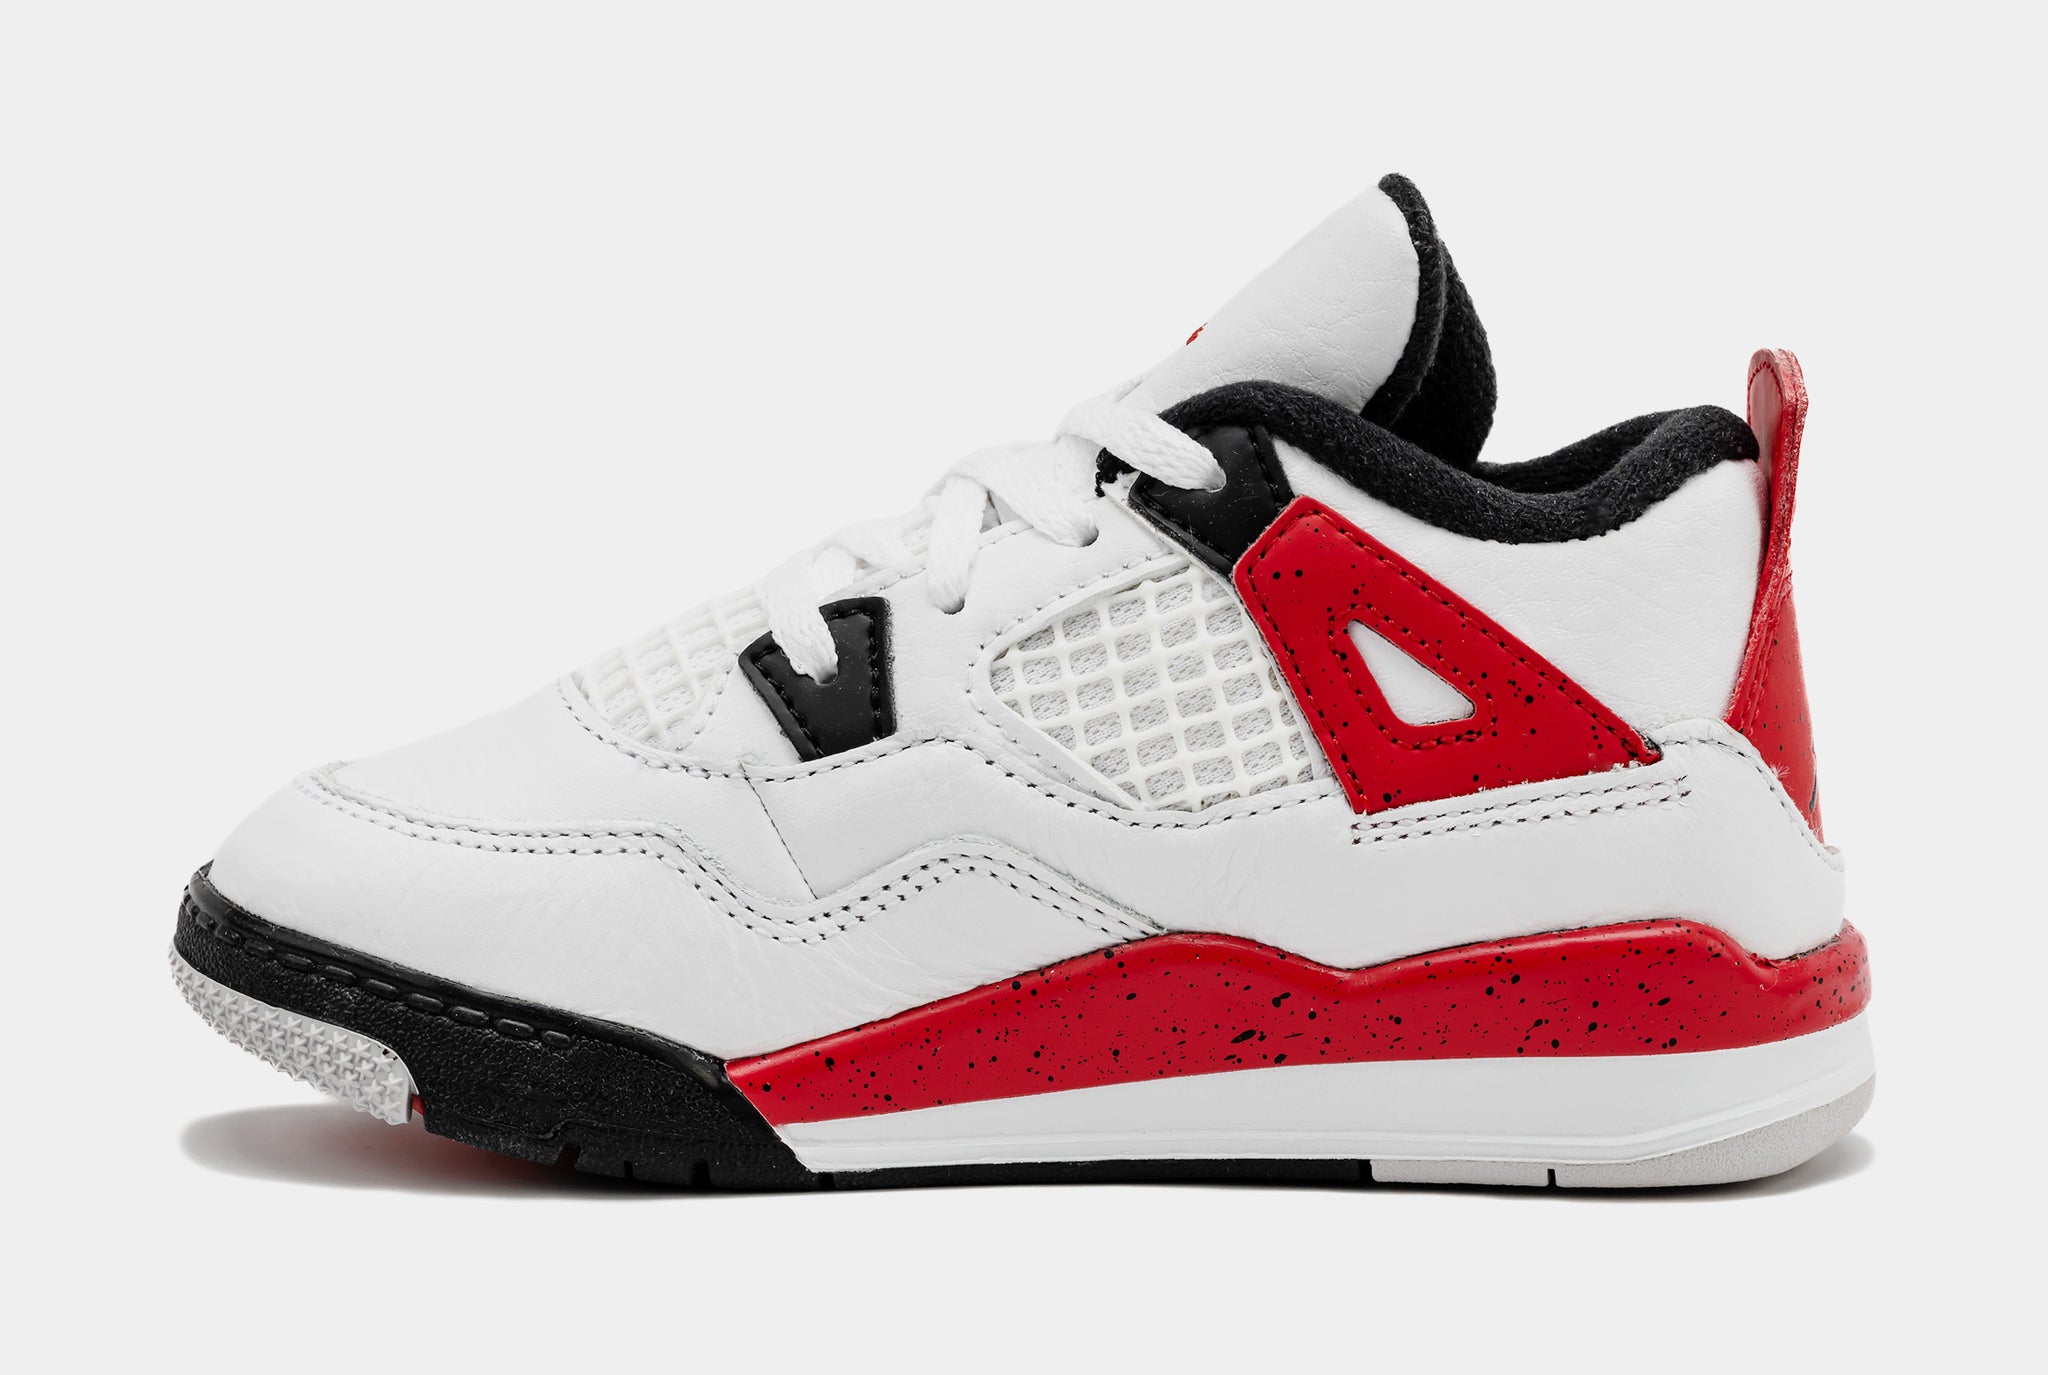 Air Jordan 4 Retro Red Cement Infant Toddler Lifestyle Shoes (White/Red)  Free Shipping